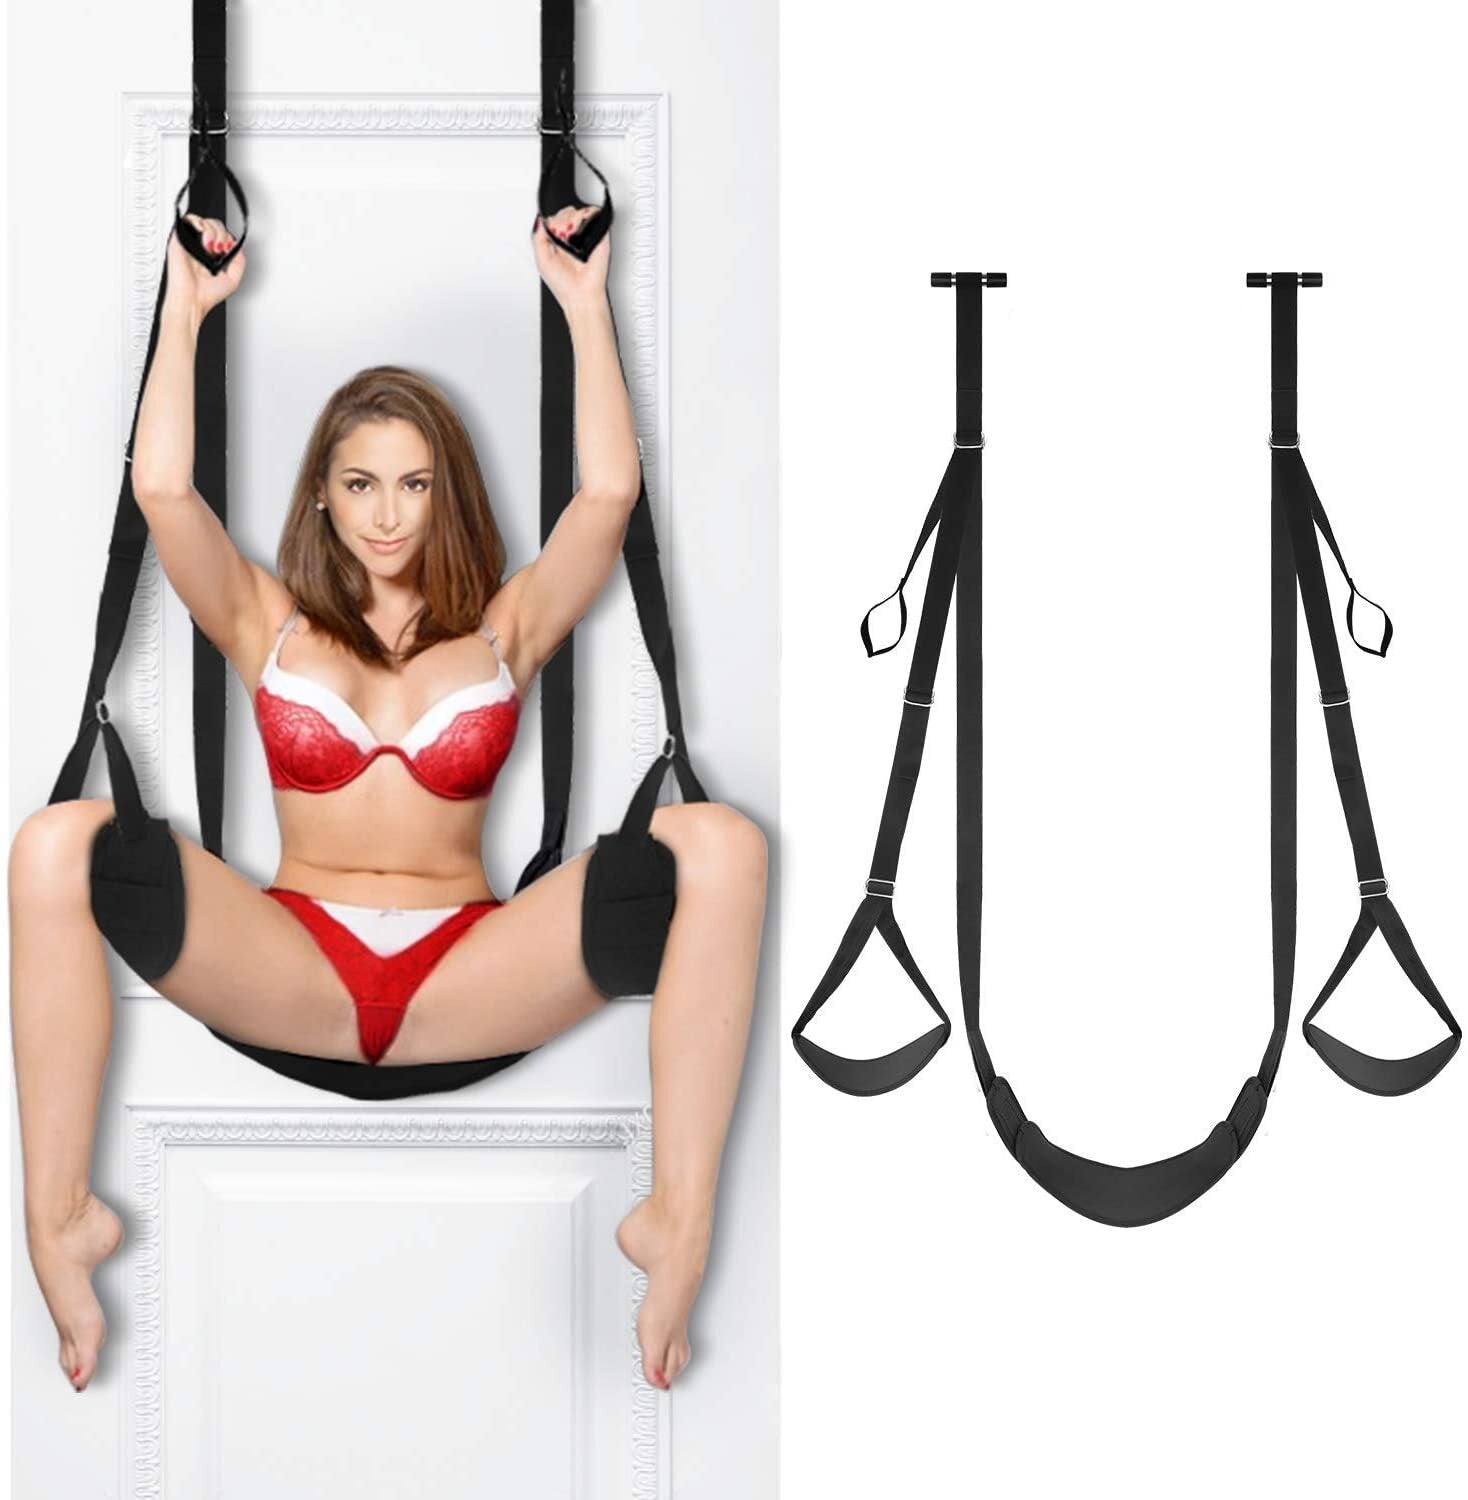 Door Sex Swing with Seat Sexy Slave Bondage Love Slings for Adult Couples with Adjustable Straps 300lbs  black